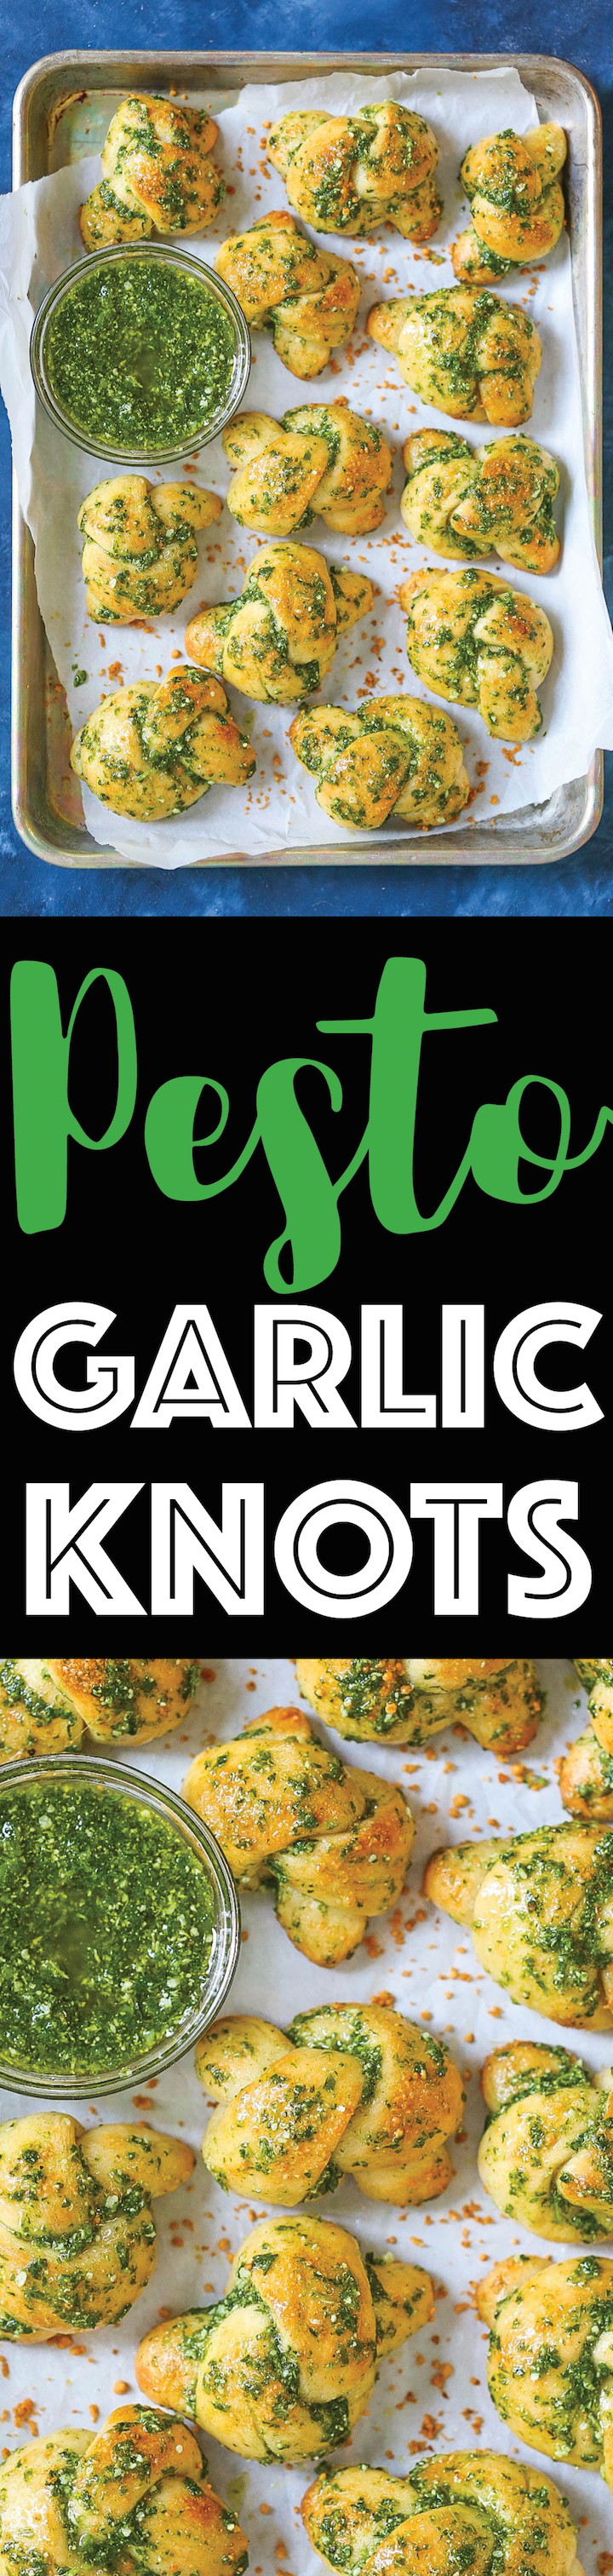 Pesto Garlic Knots - So garlicky, so buttery, and just so perfect! They are incredibly soft and melt-in-your-mouth amazing with a homemade pesto sauce. These also come together in less than 15 minutes using pizza dough. See, it really is SO EASY!